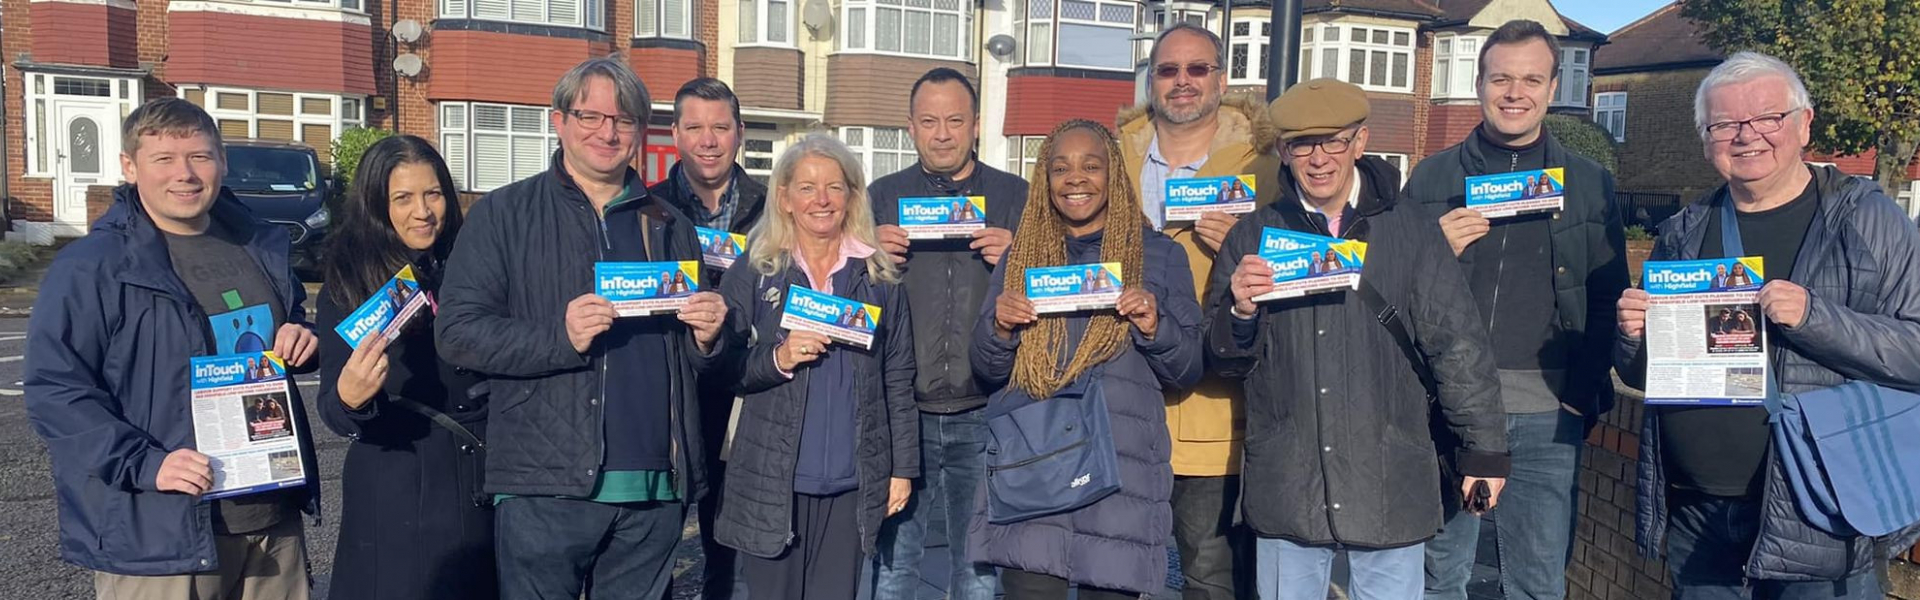 Edmonton and Winchmore Hill Conservatives